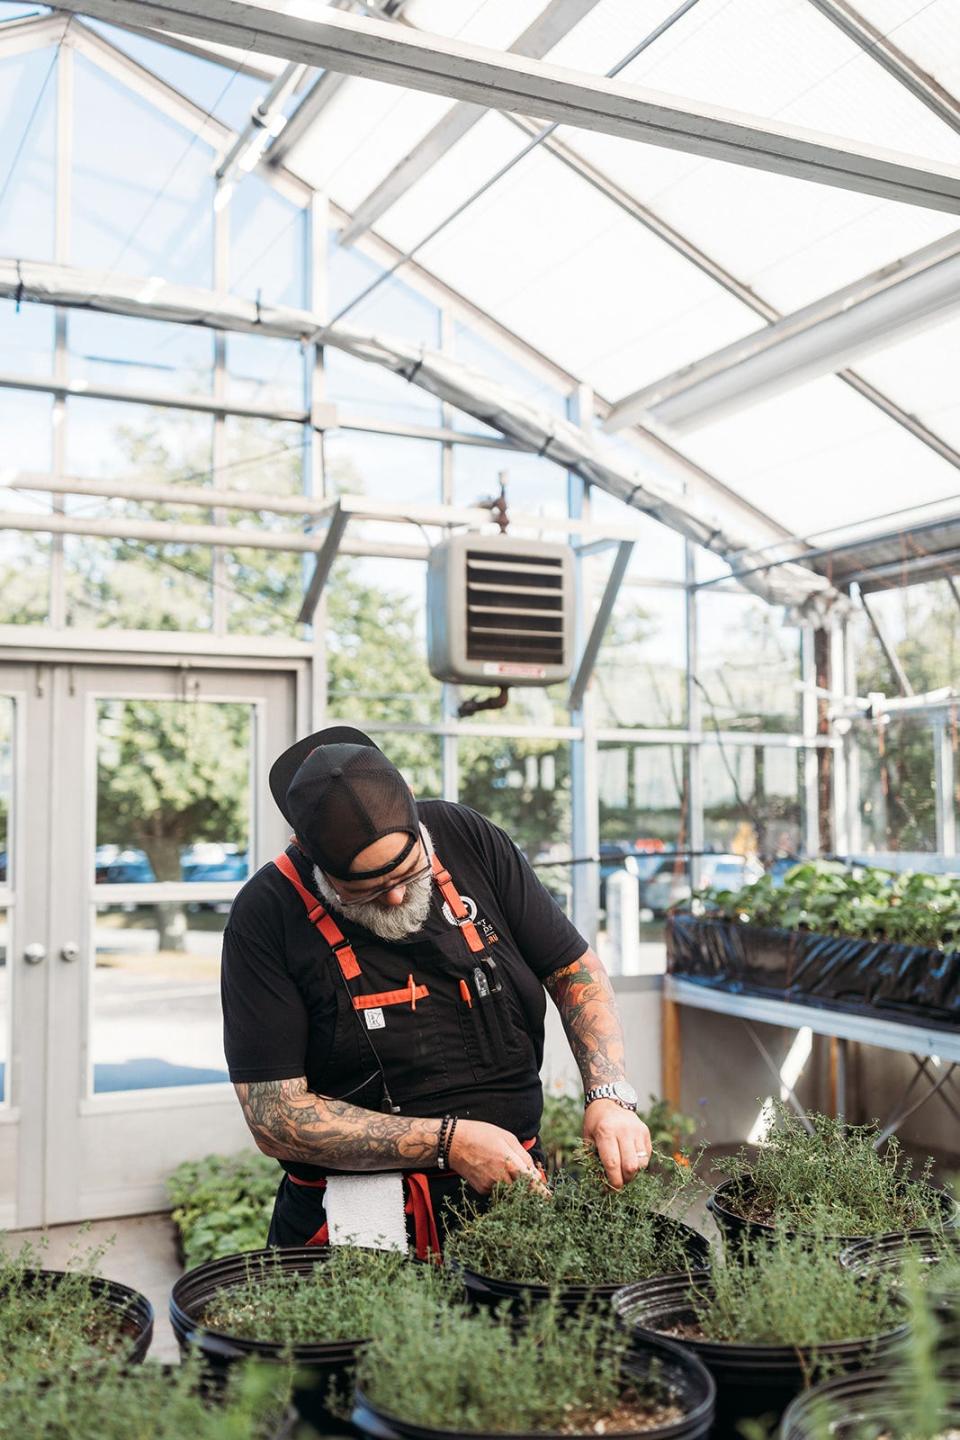 Executive Chef Andy Texeira cuts fresh herbs in the former Chaves Gardens greenhouse, which is now a part of Newport Vineyards' culinary garden.